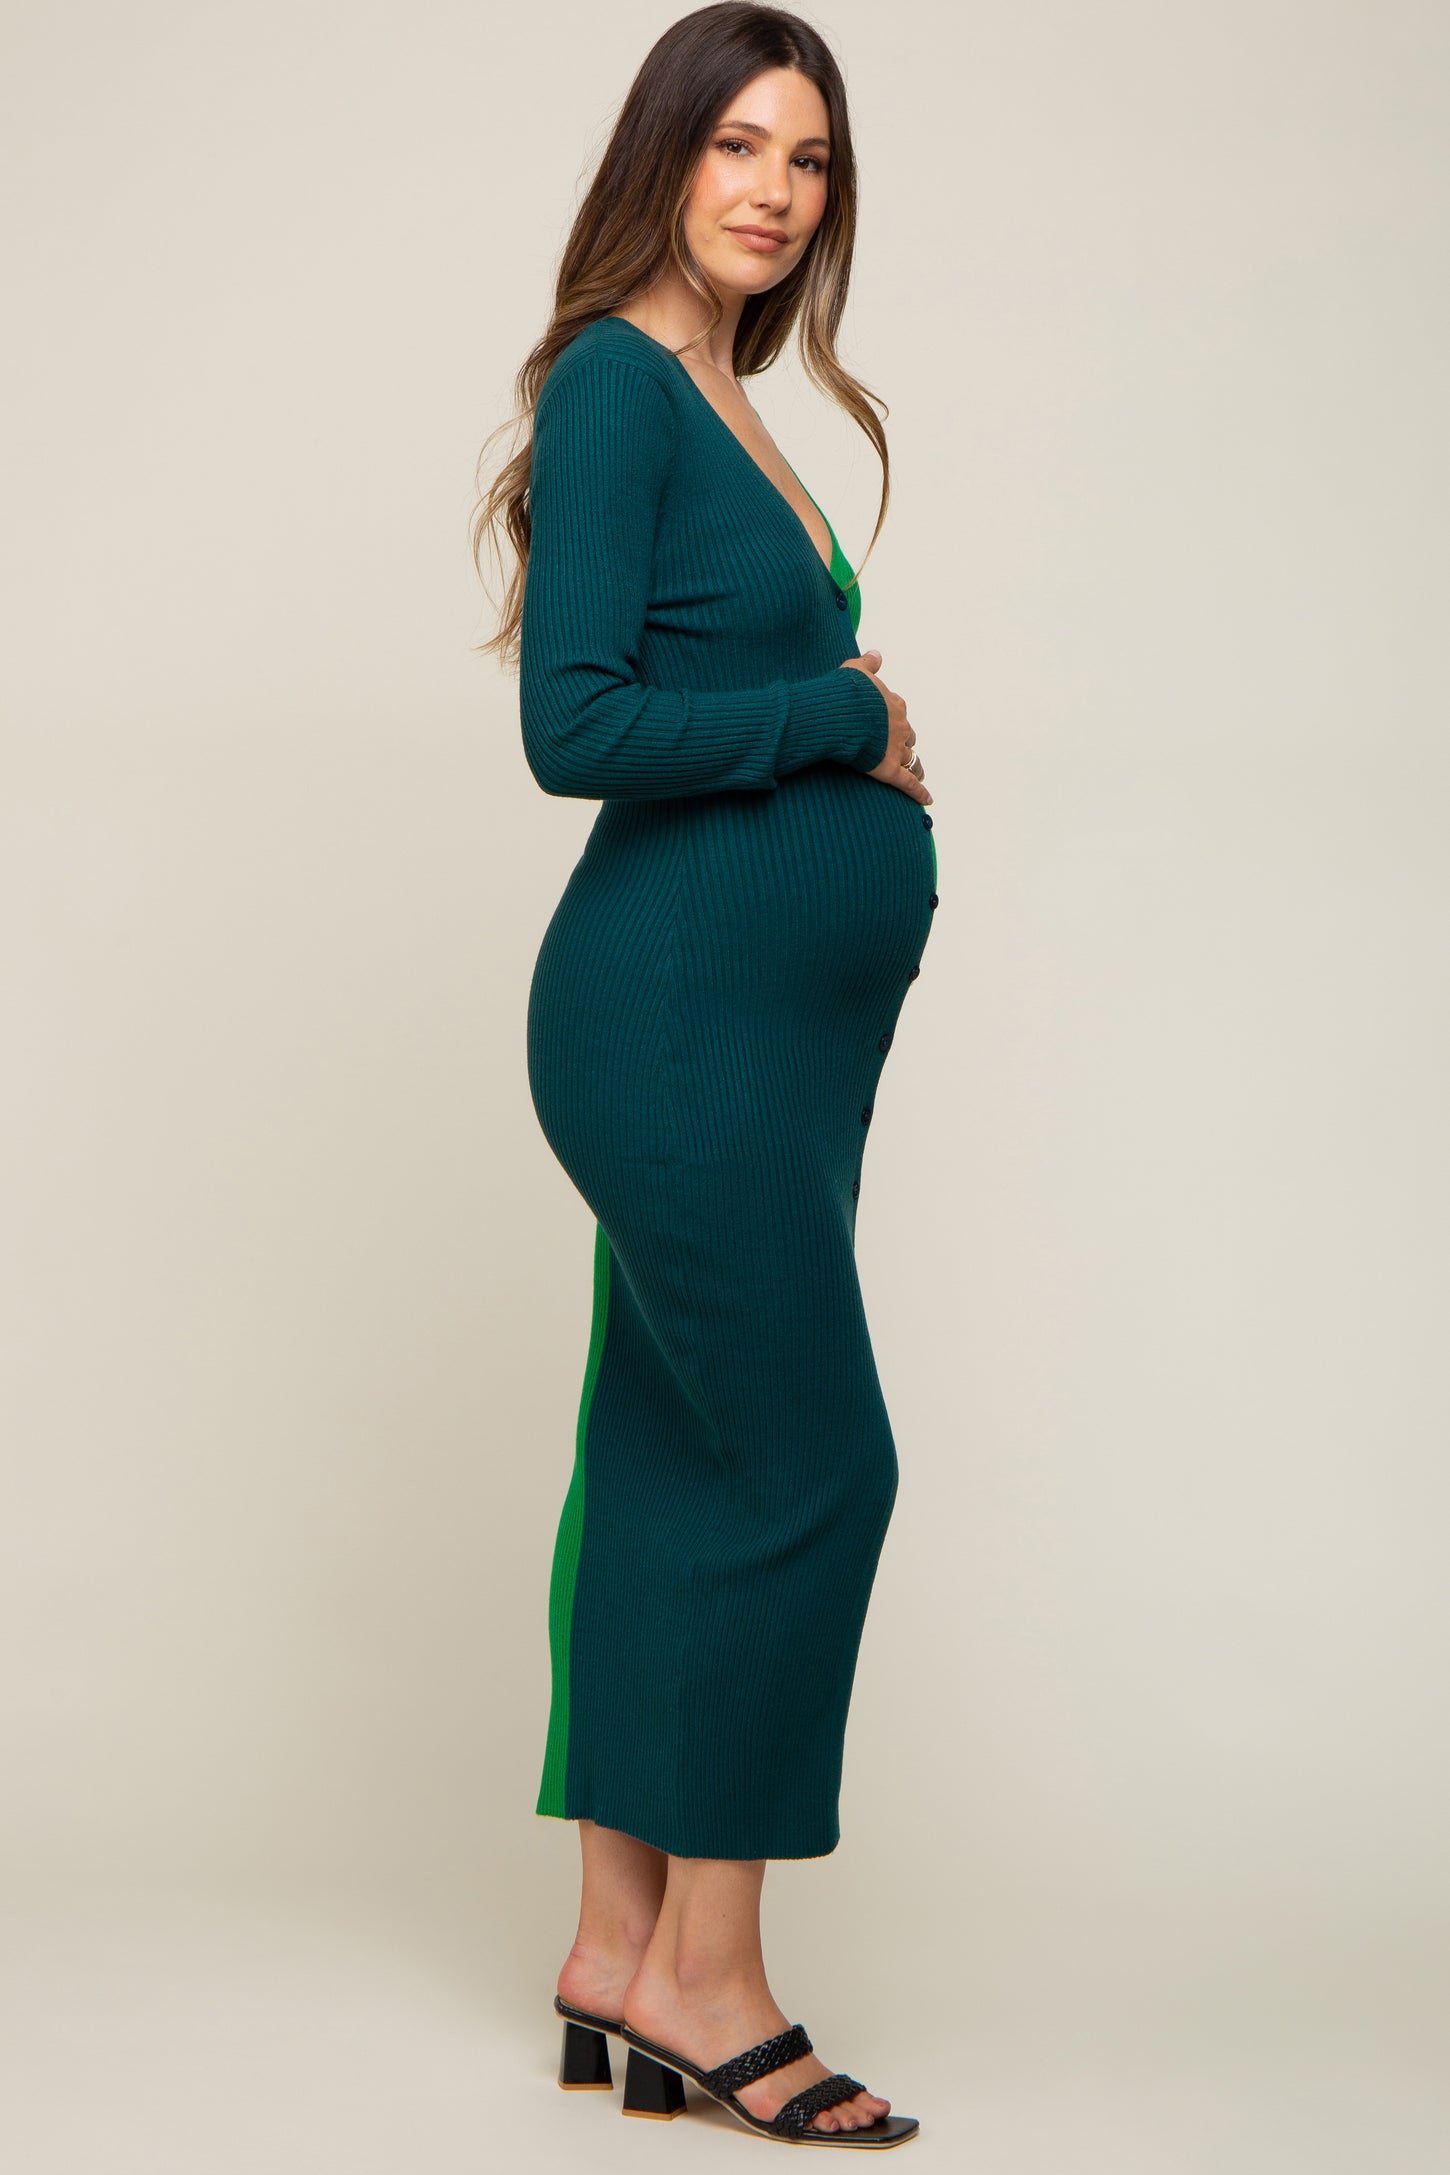 Teal Green Colorblock Ribbed Button Down Maternity Dress